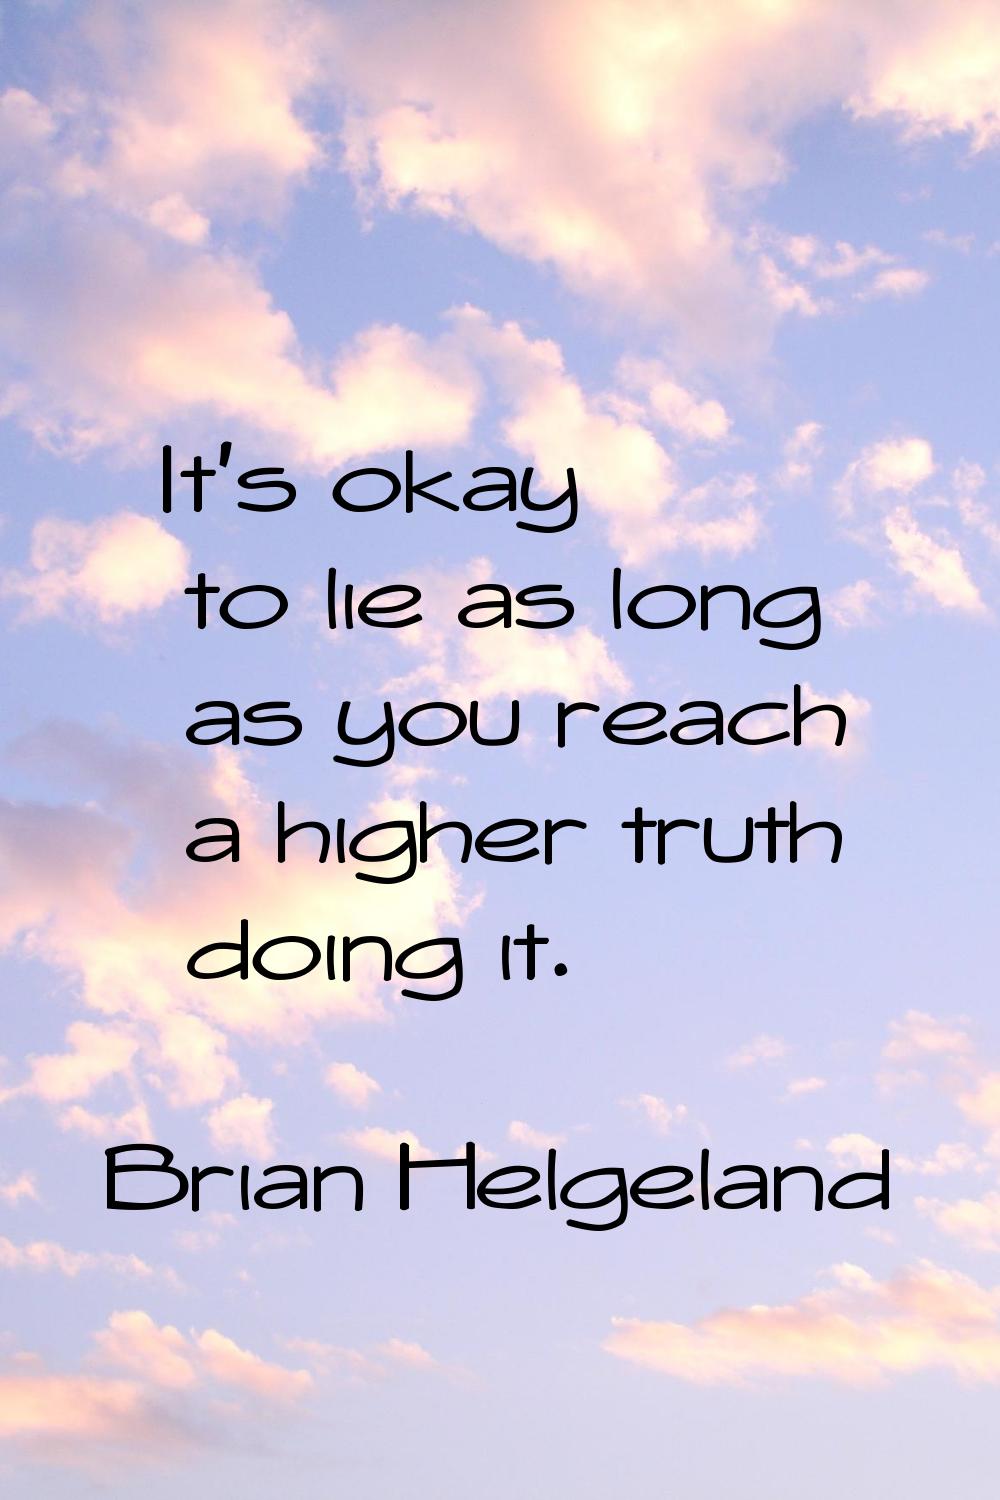 It's okay to lie as long as you reach a higher truth doing it.